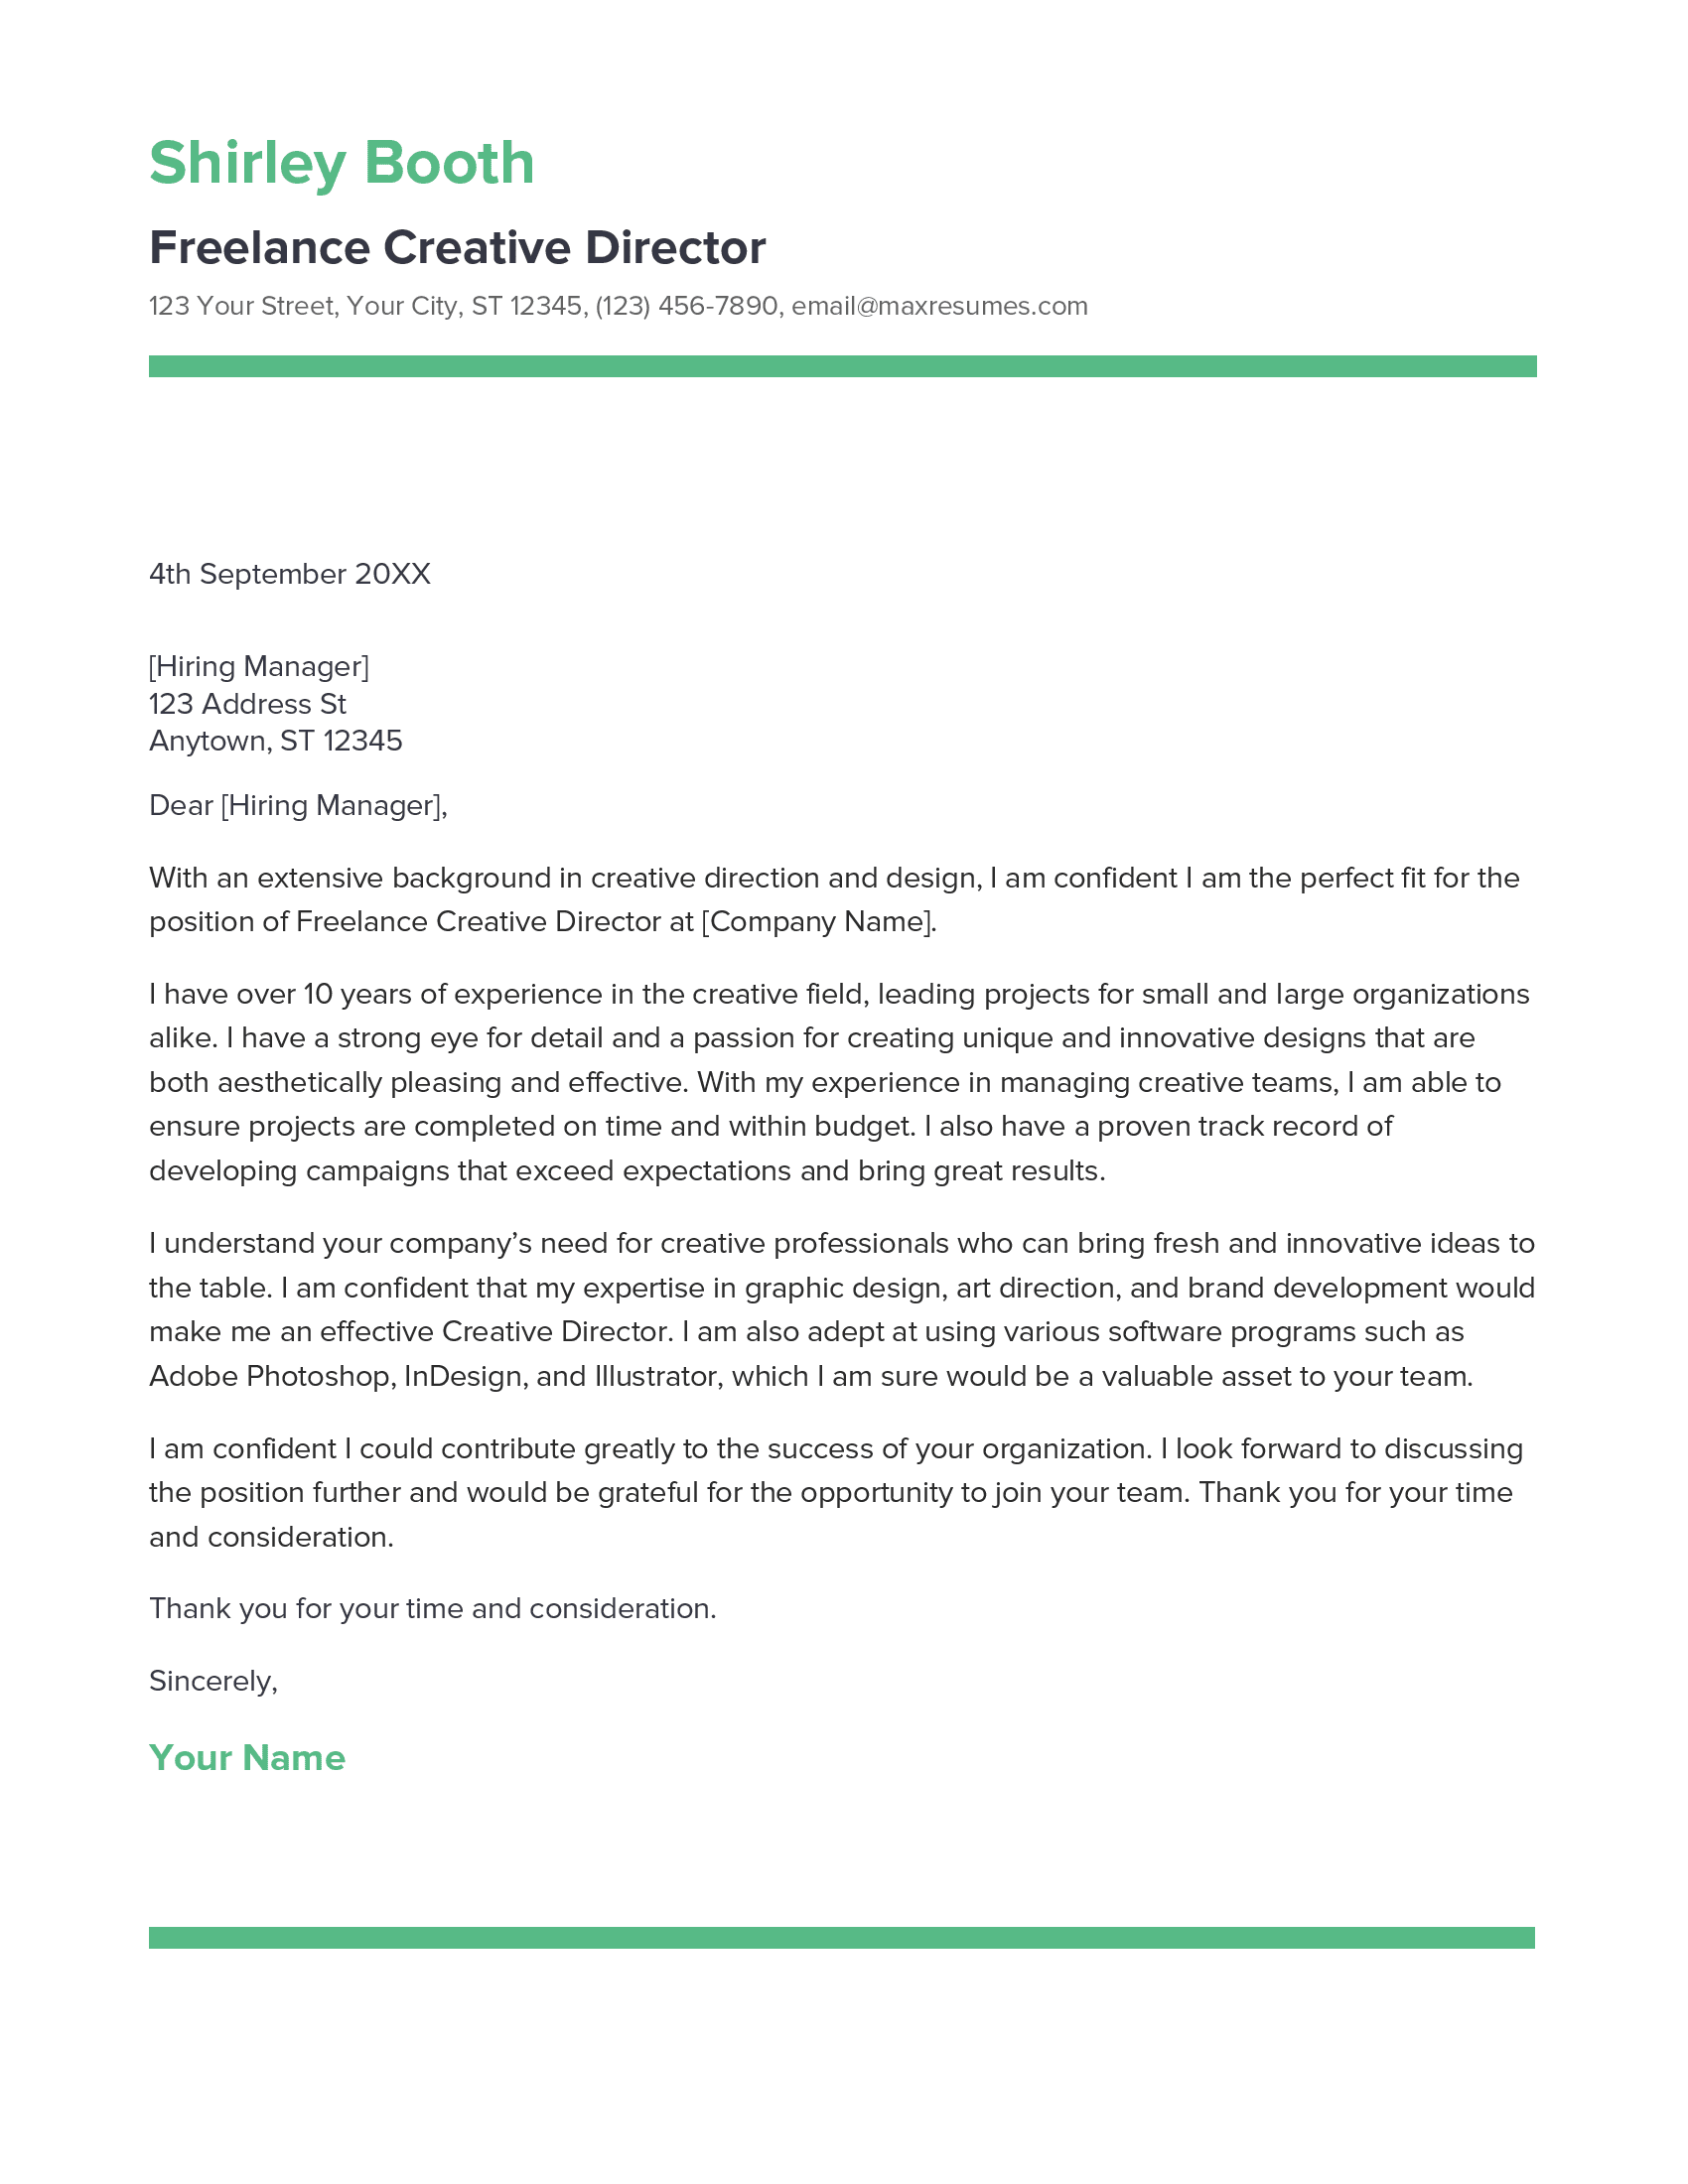 Freelance Creative Director Cover Letter Example